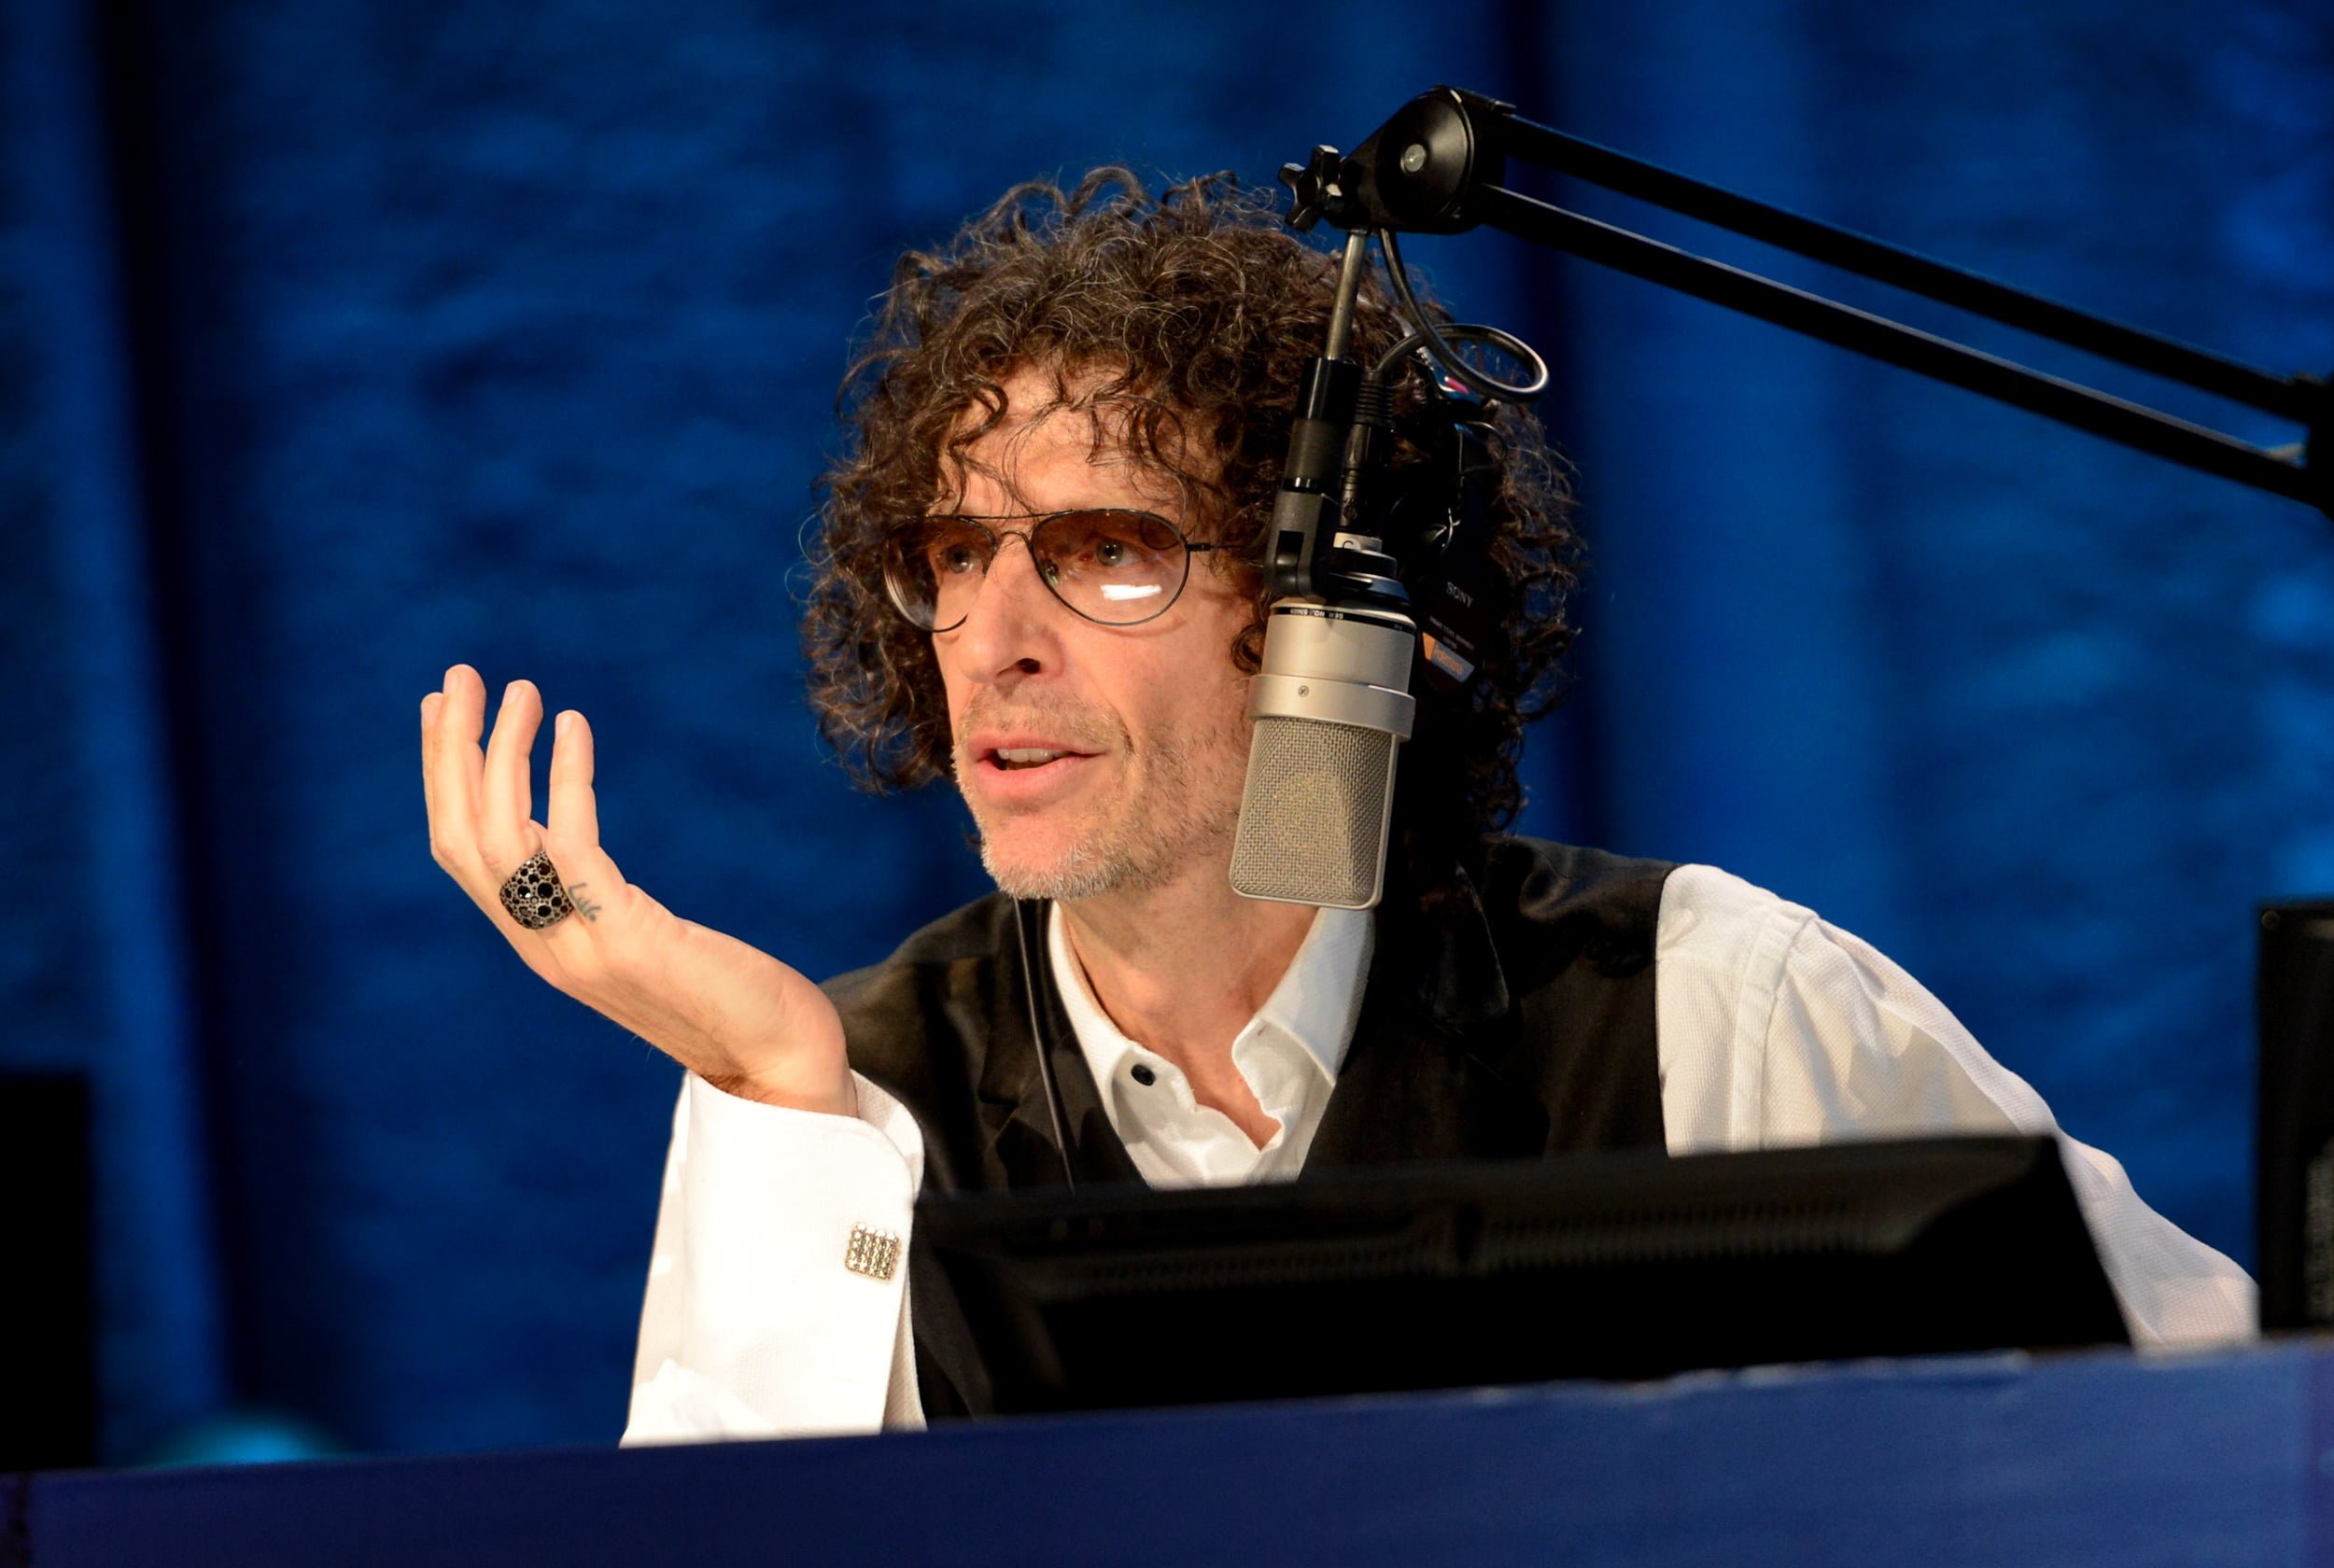 Howard Stern: Unvaccinated Shouldn't Be Admitted to Hospital